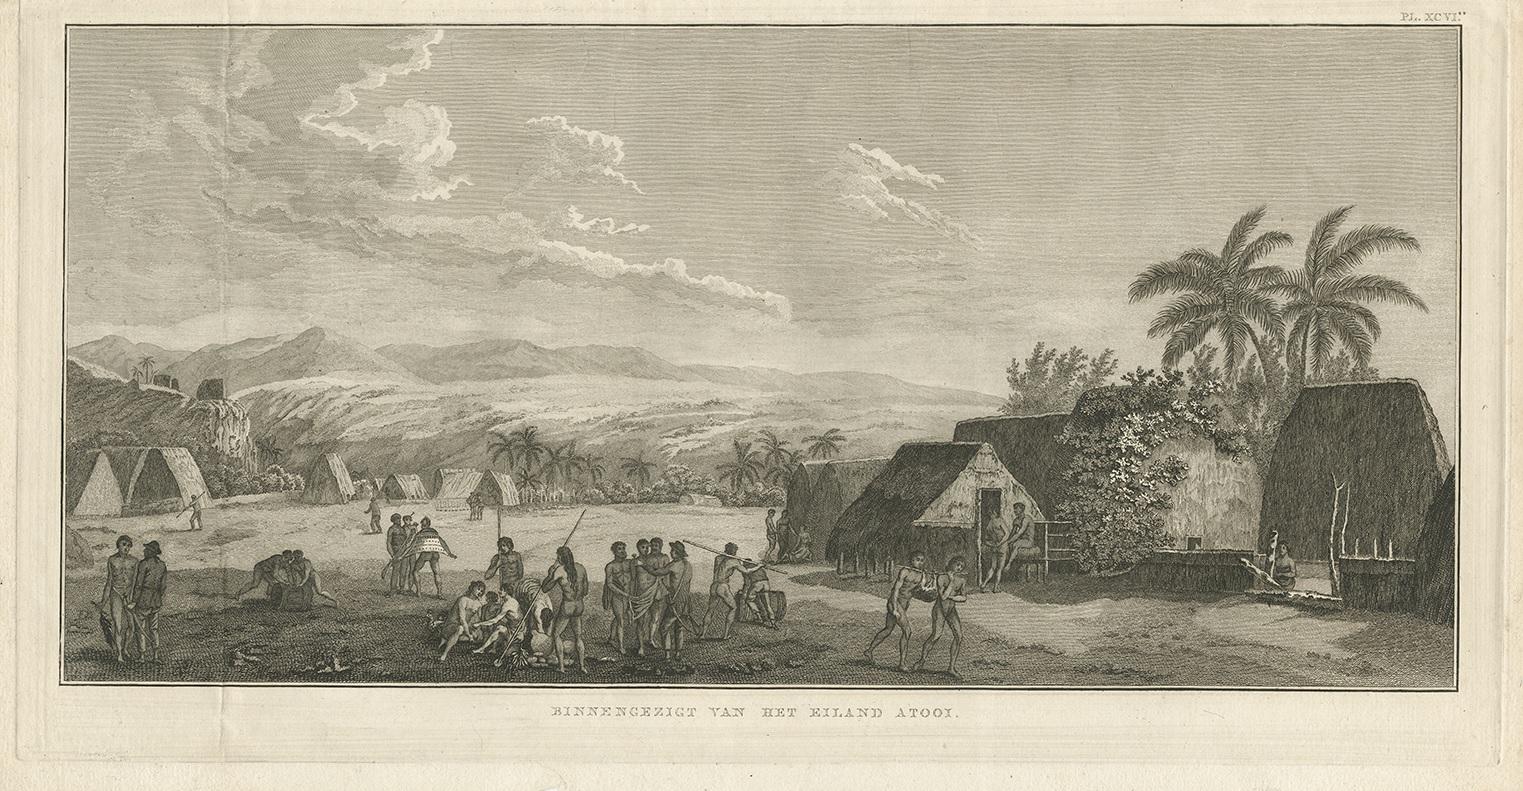 Antique print titled 'Binnengezigt van het Eiland Atooi'. This print depicts a view of Atooi Island, the former name of Kauai, a Hawaiian Island. Originates from 'Reizen rondom de Waereld' by J. Cook. Translated by J.D. Pasteur. Published by